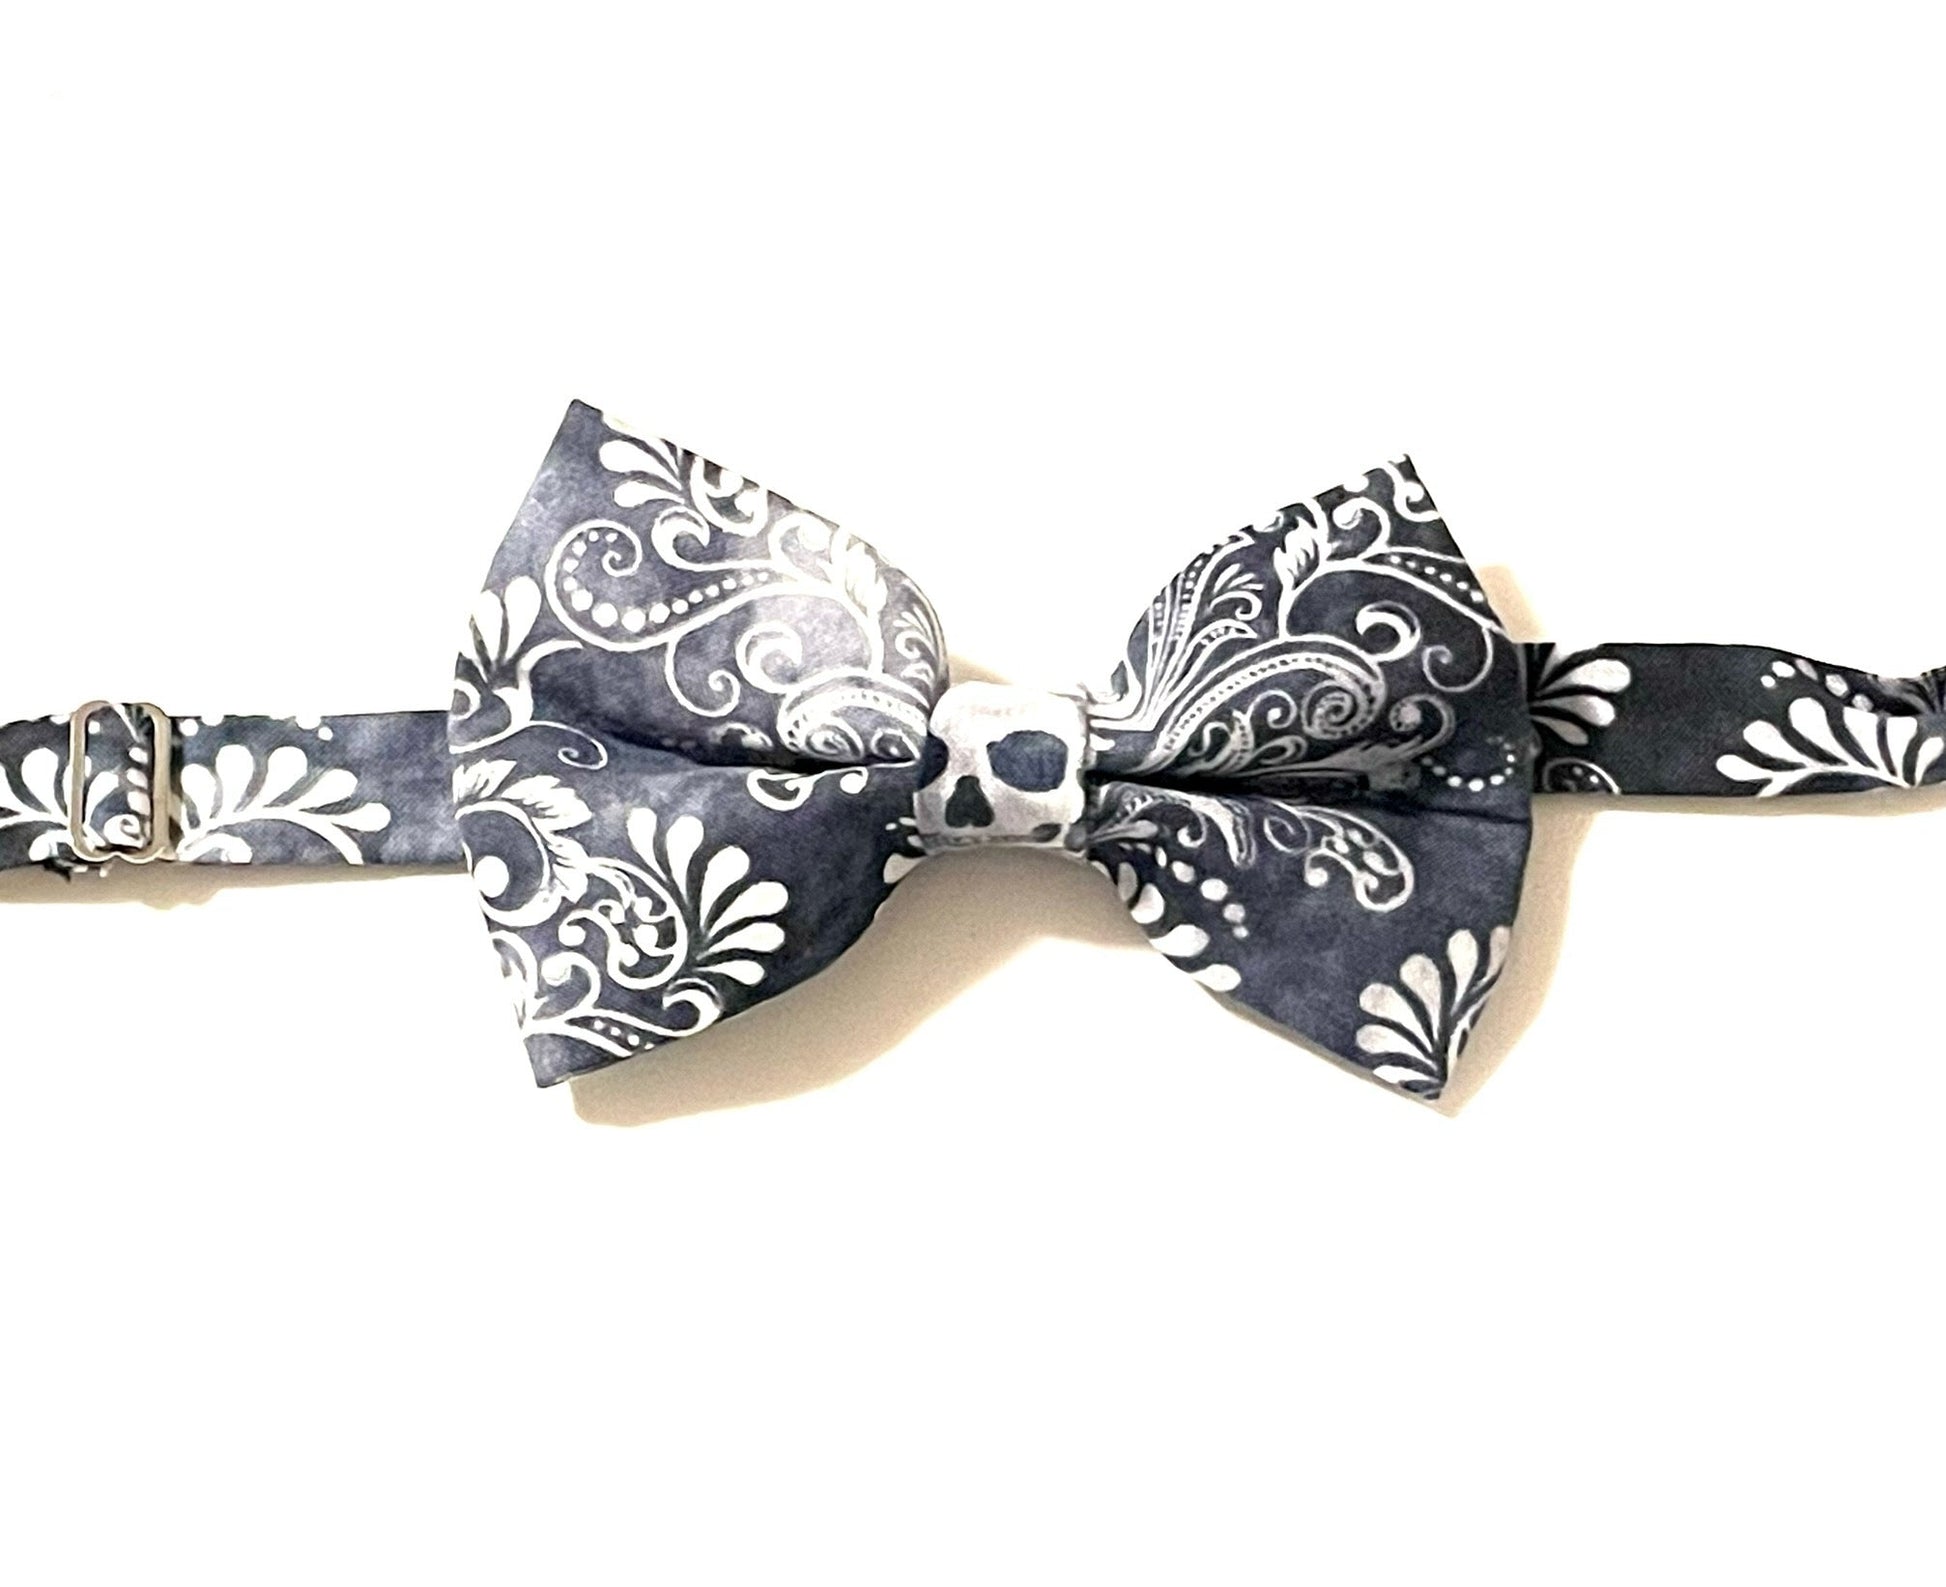 Black skulls bow tie with a purposely faded print. Skulls may fall anywhere on the bow tie